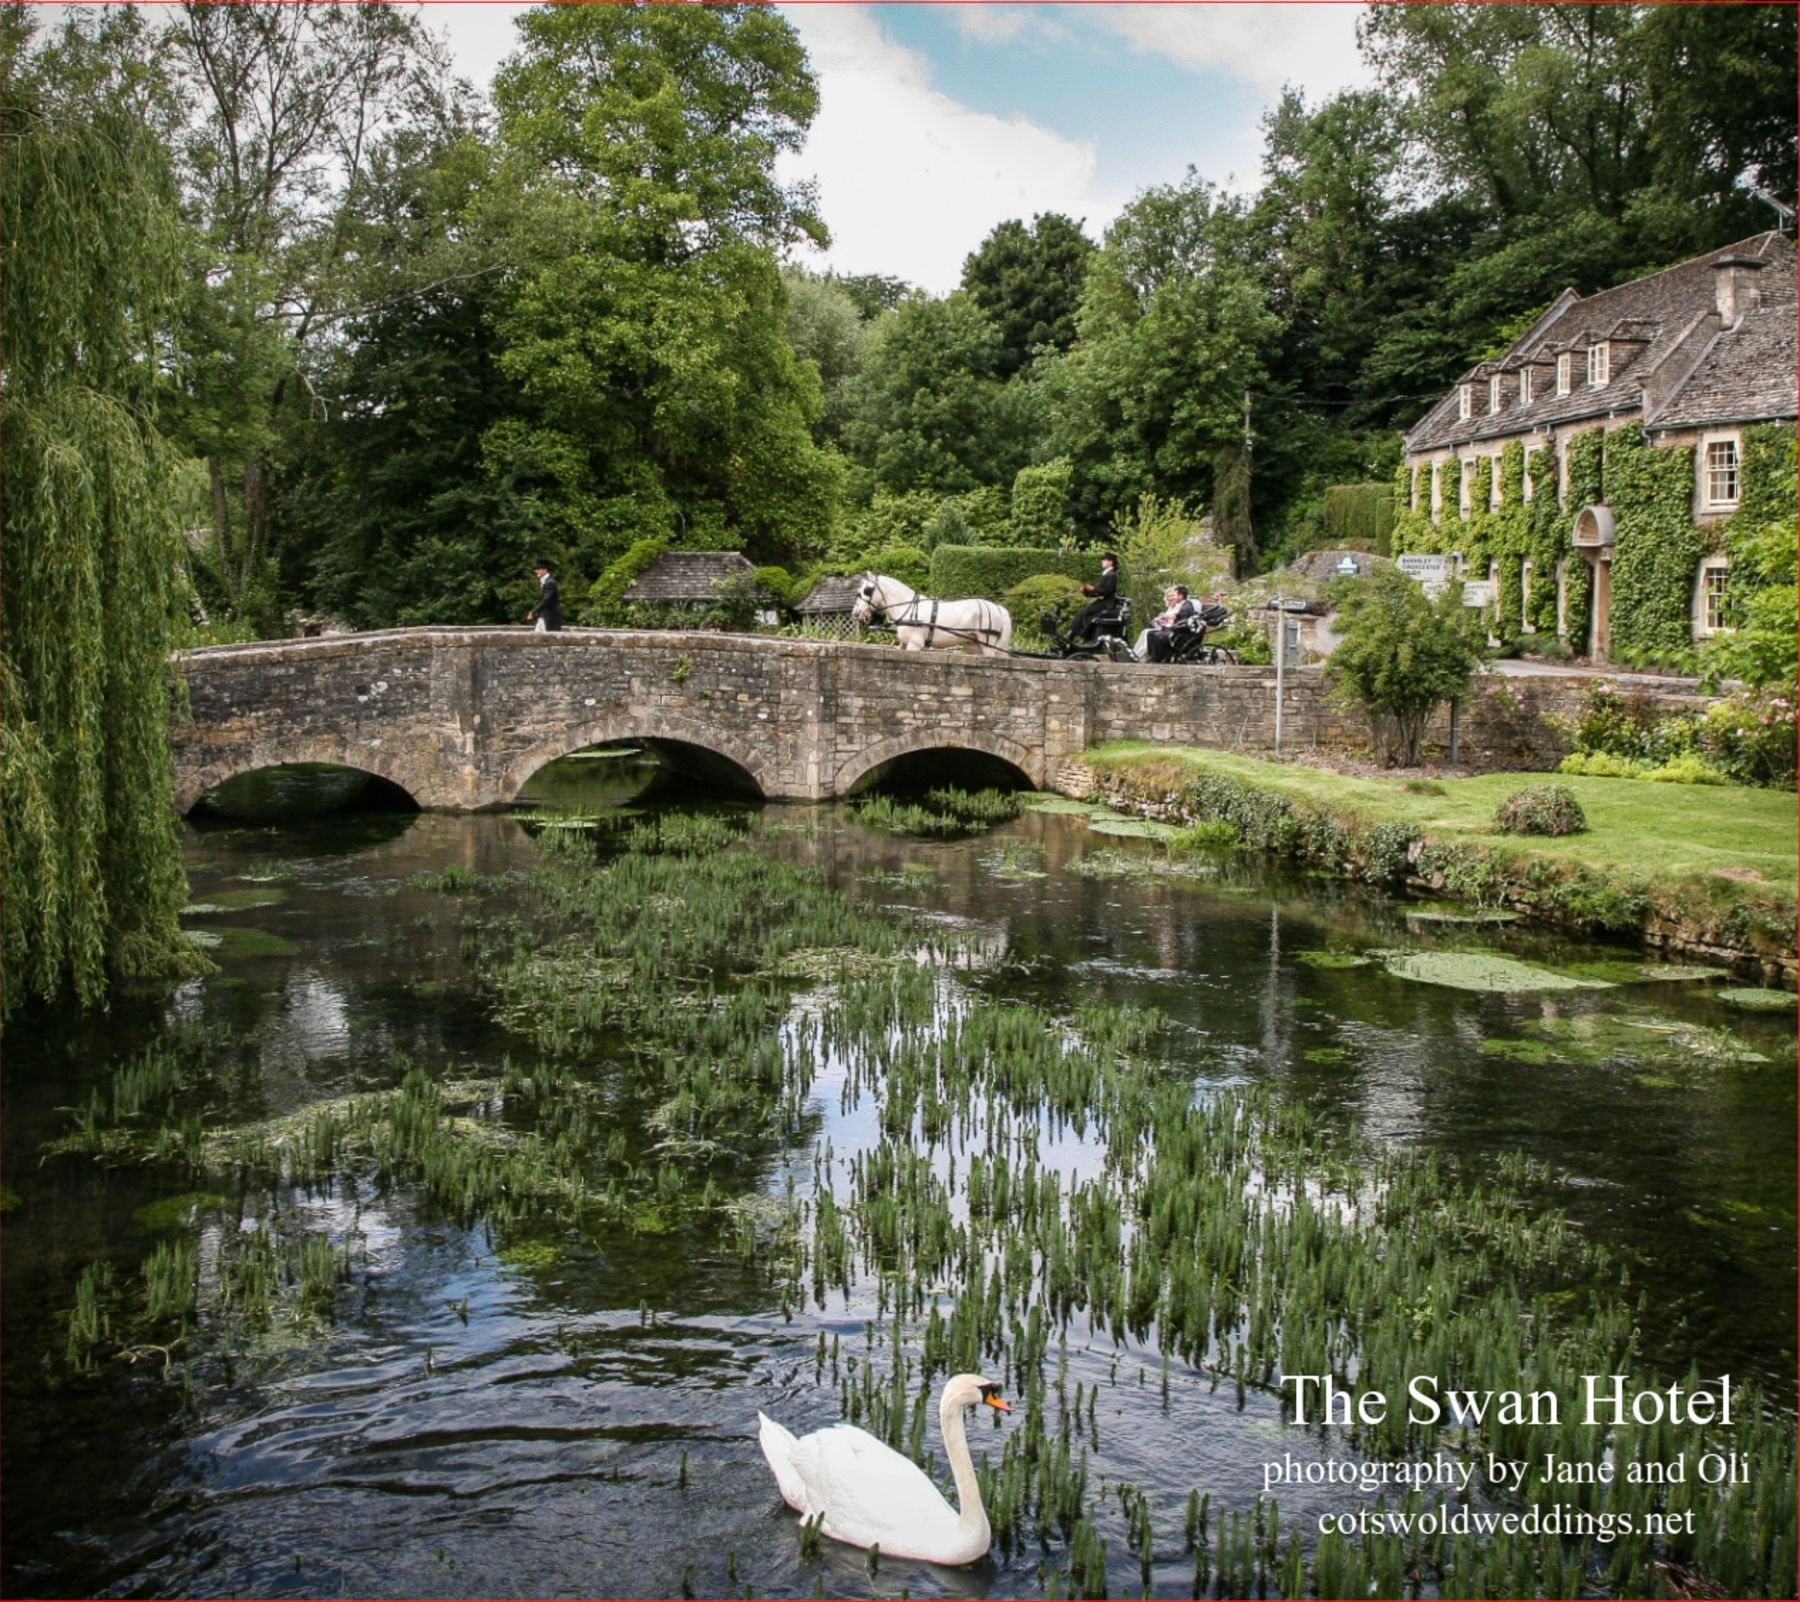 An album of wedding photography at The Swan Hotel in Bibury